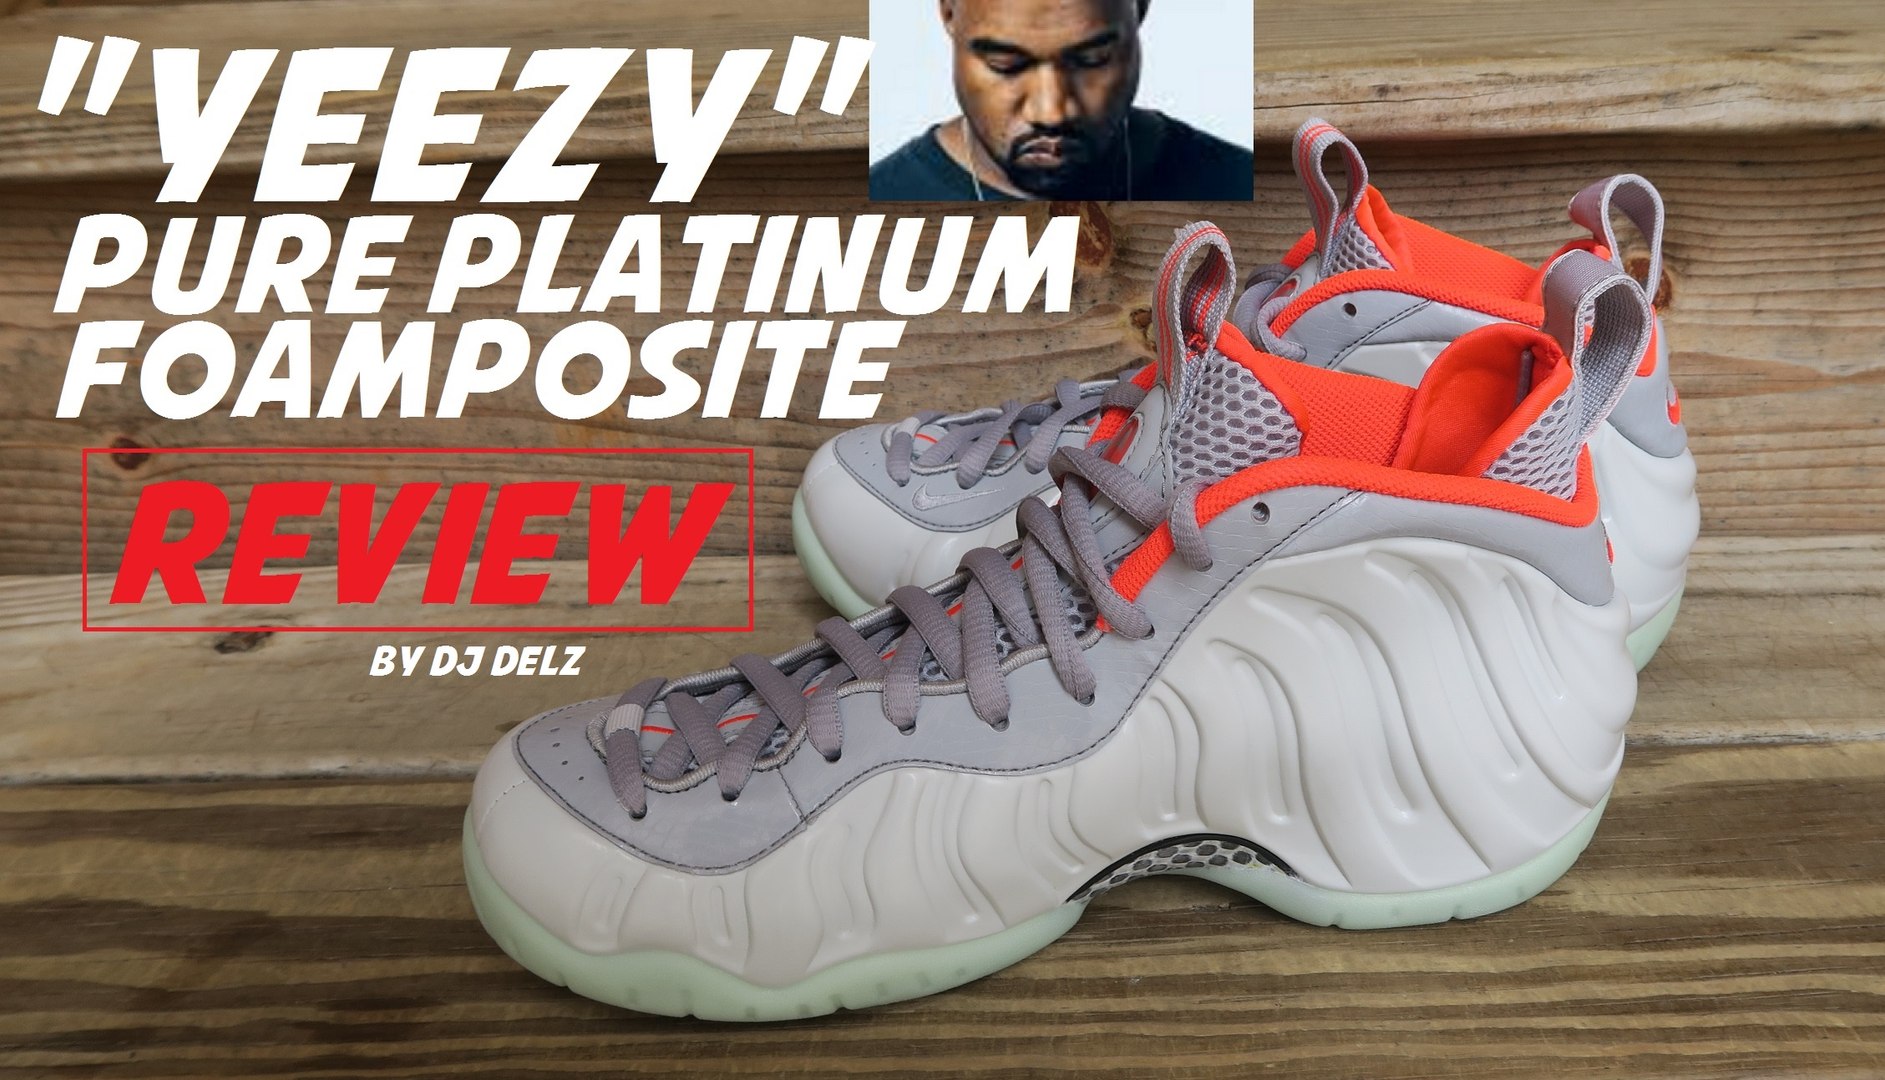 Nike Air Foamposite Pure Platinum Review With Comparison To Kanye's Shoe + Glow Test With Dj Delz - video Dailymotion